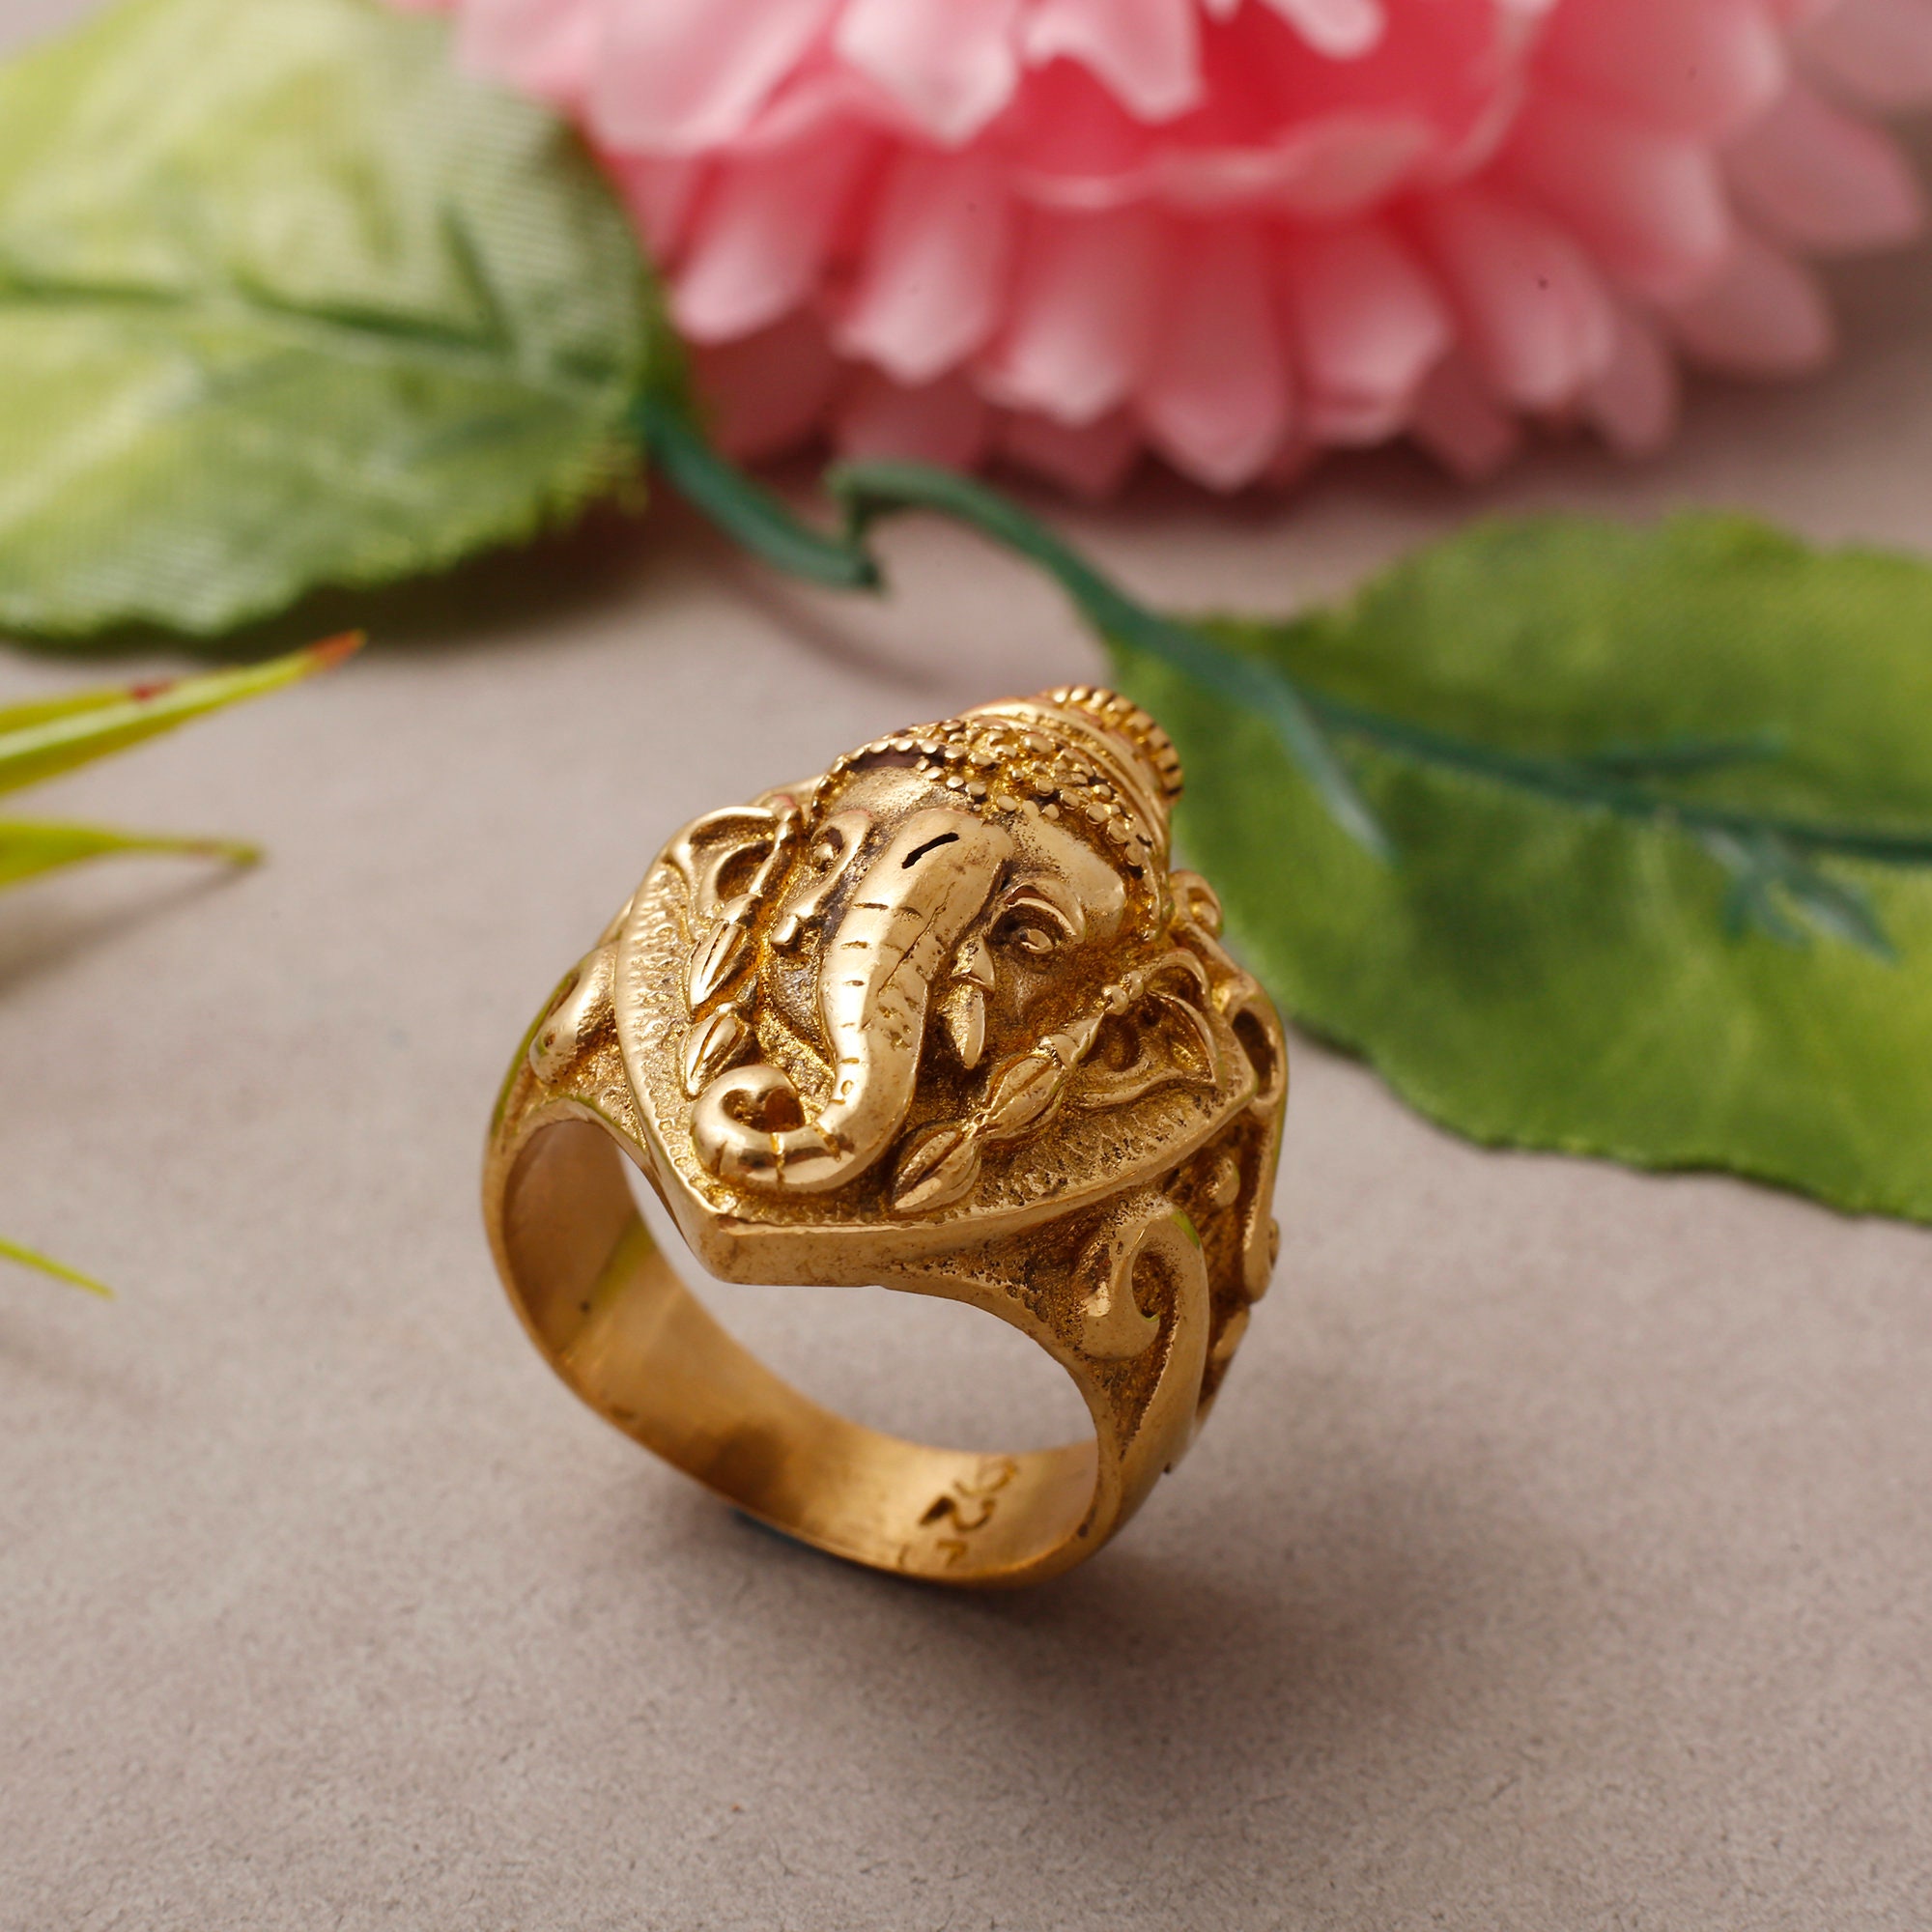 Buy quality Gold Ganesha Gents Ring in Ahmedabad